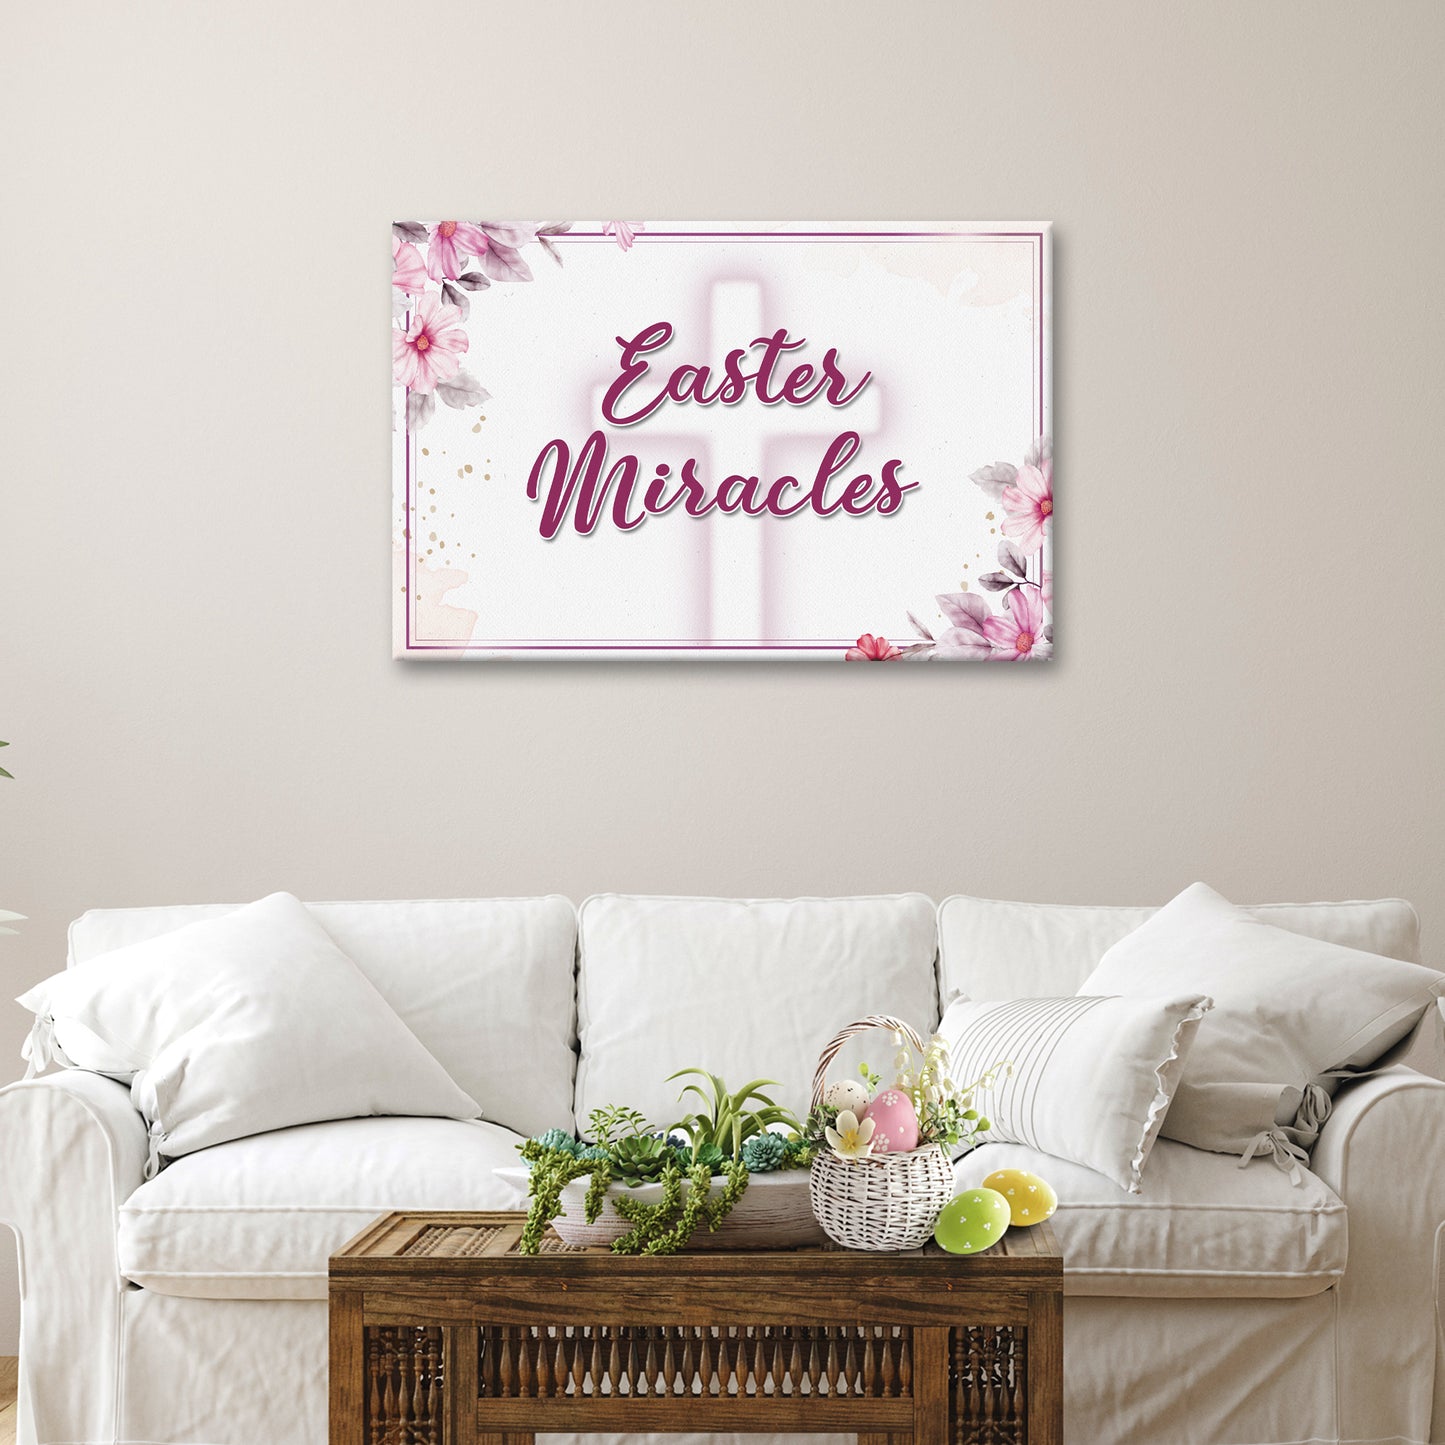 Easter Miracles Sign - Image by Tailored Canvases